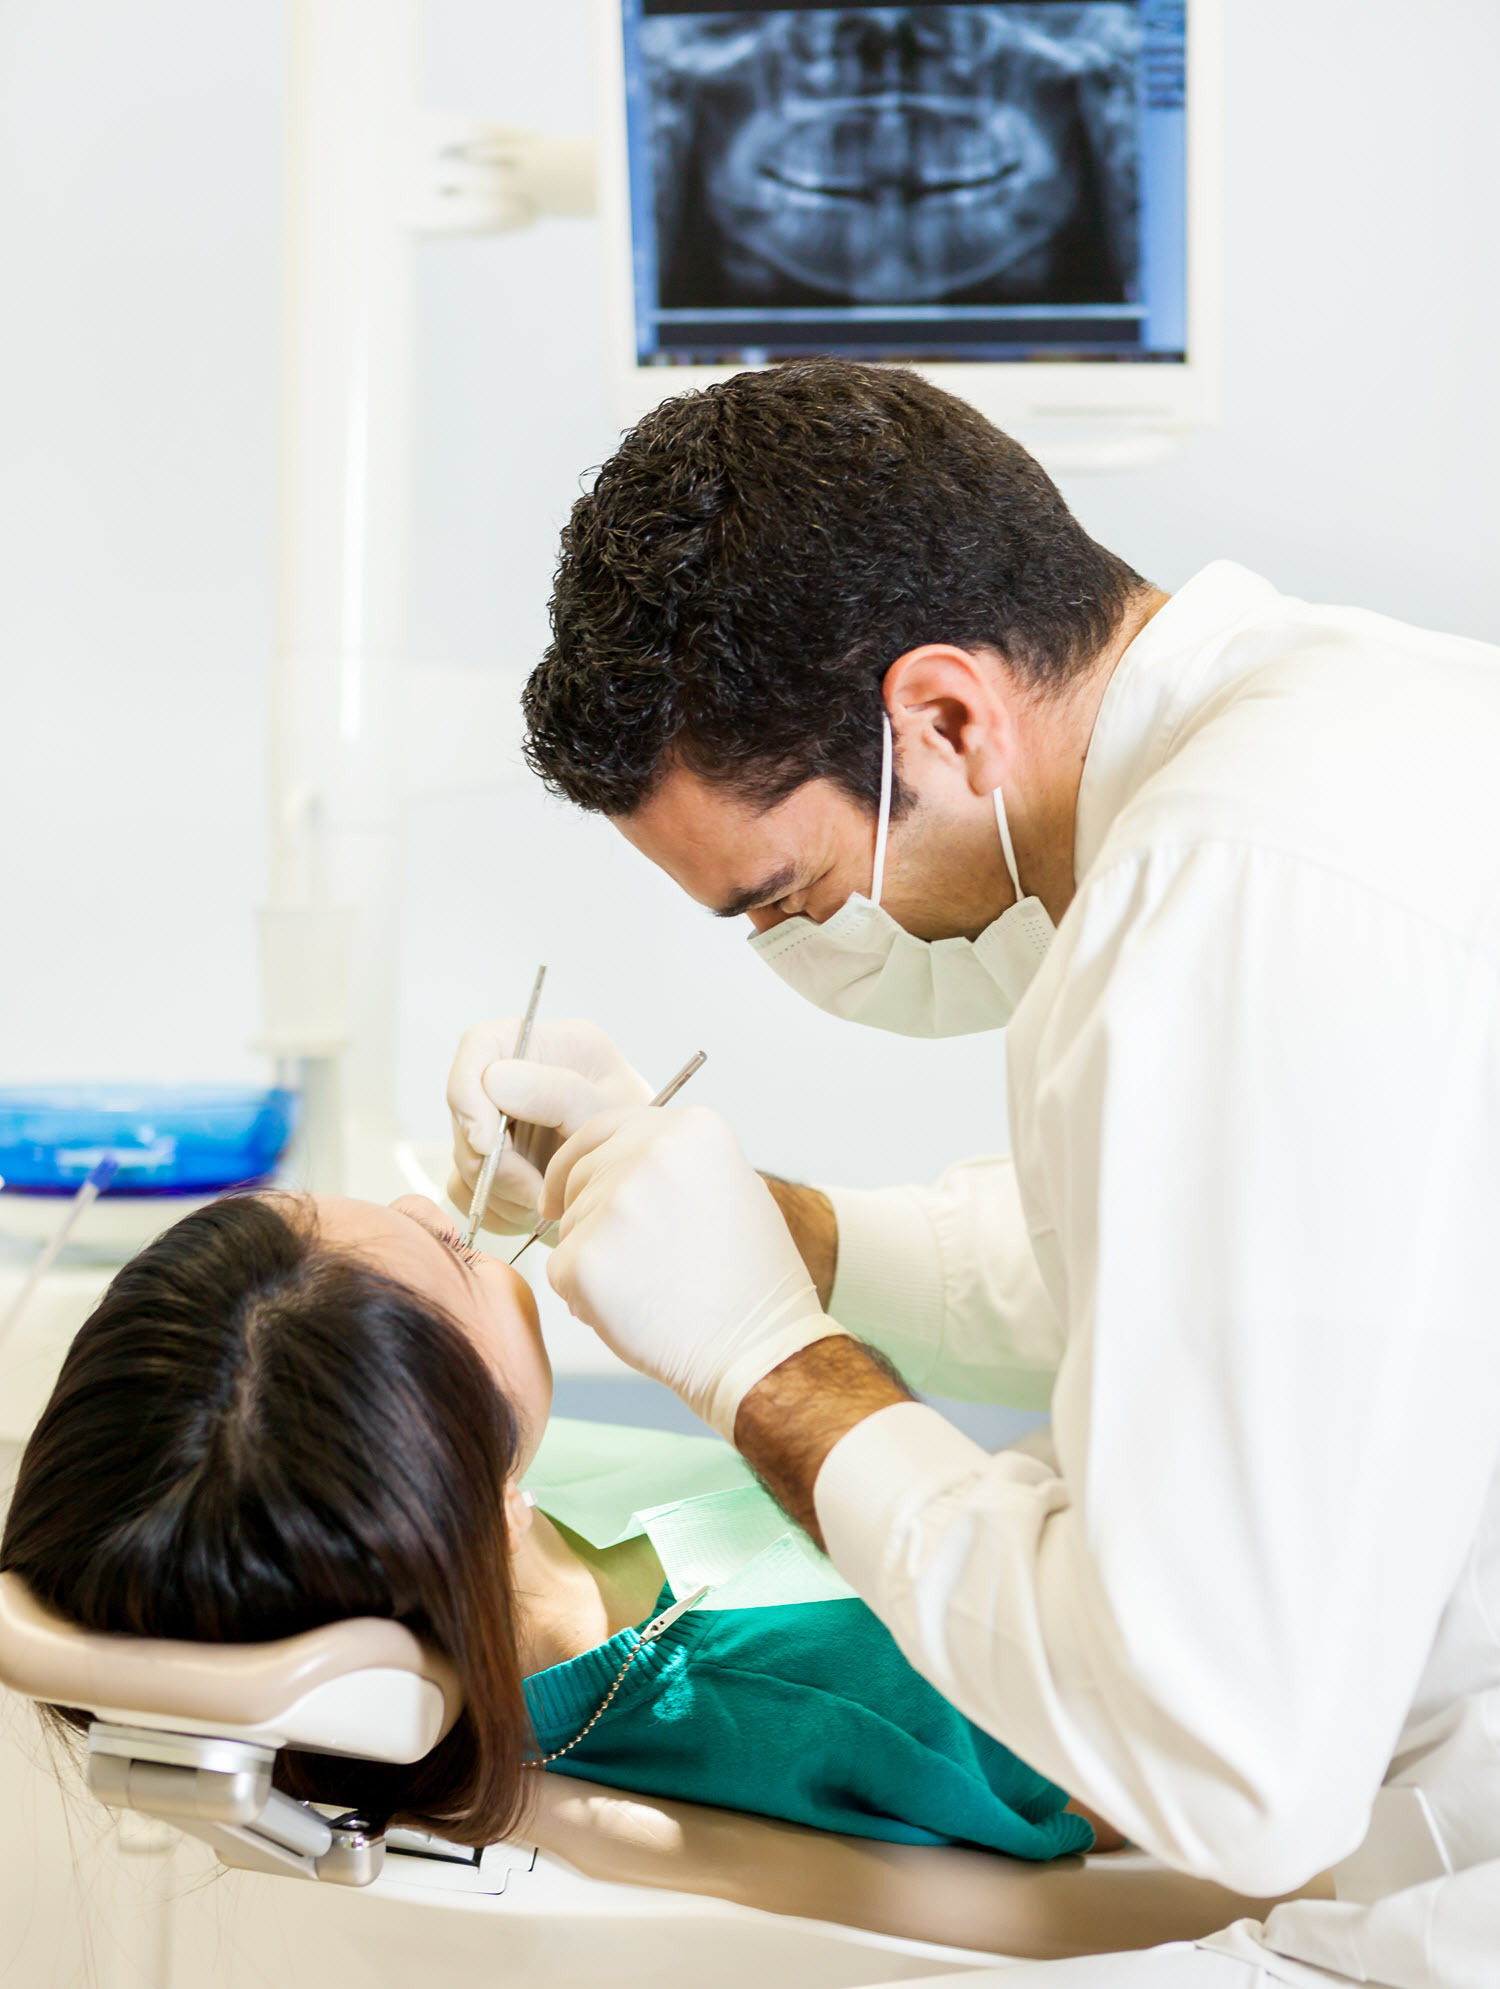 Dentist Recruiting and Hiring in 2021